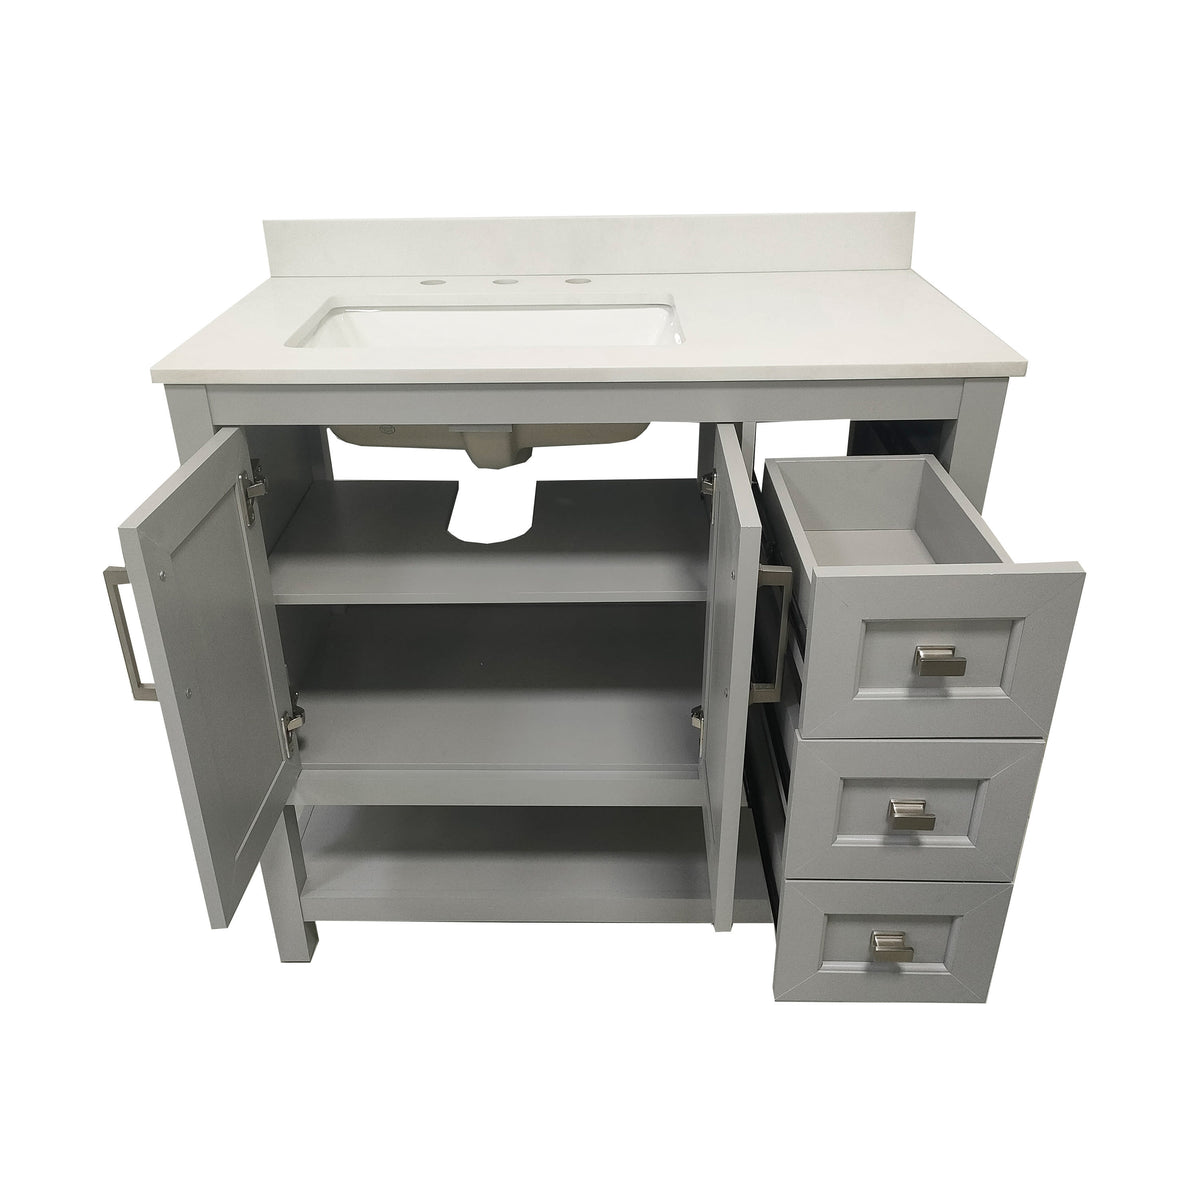 Gray,36" |#| 36 Inch Bathroom Vanity with Sink, Open Storage, and Storage Drawers in Gray